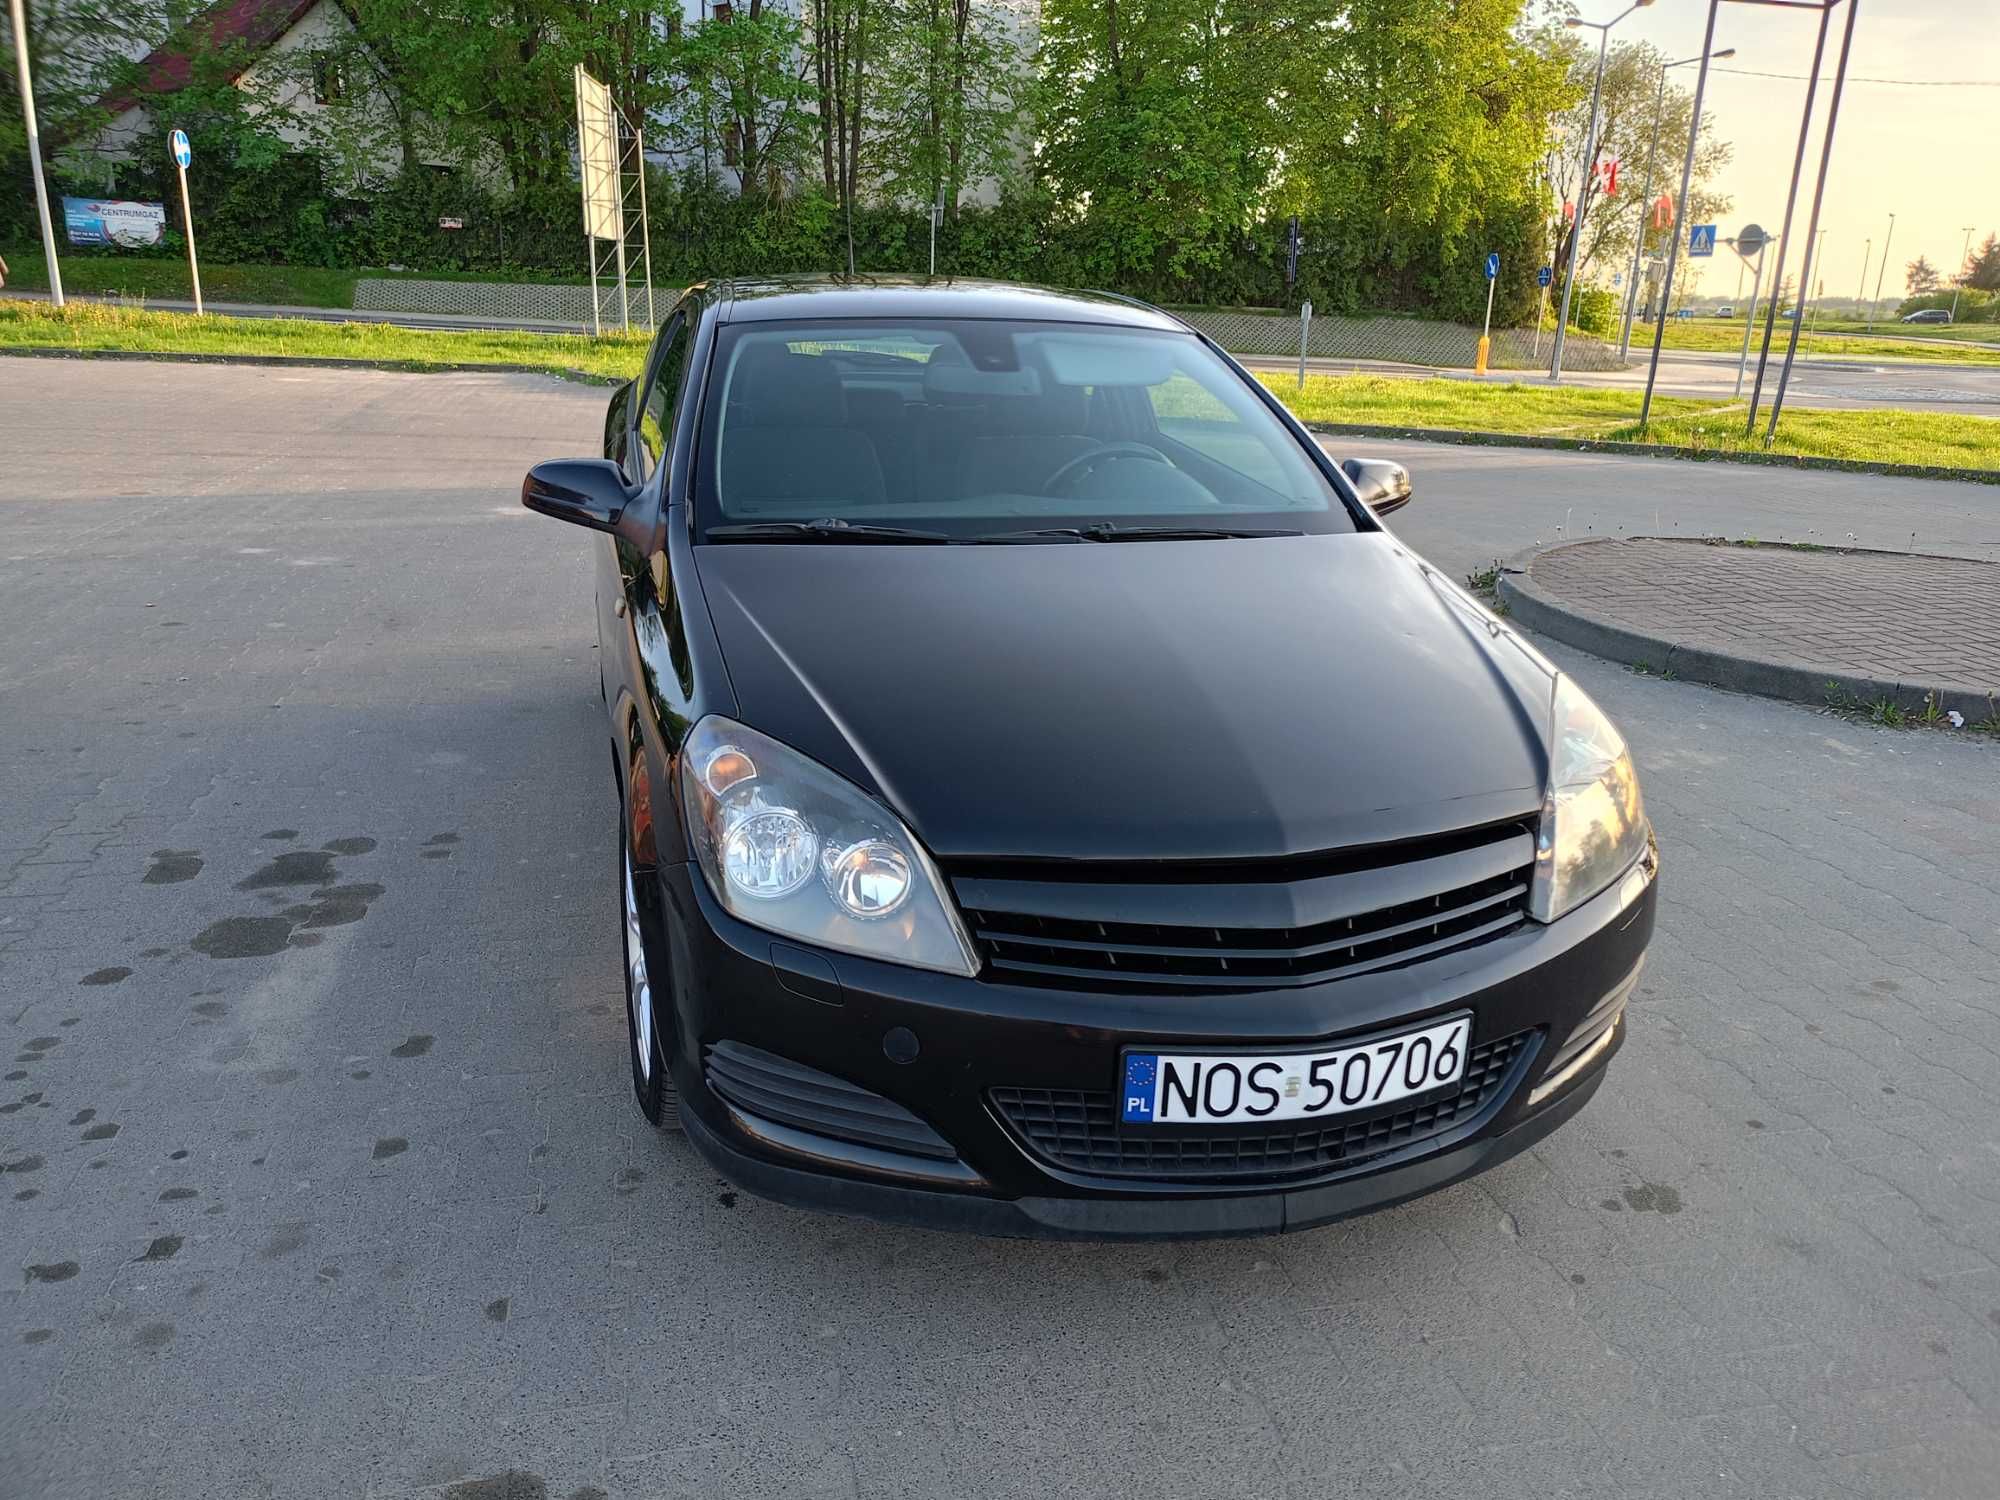 Opel  Astra   h   Coupe  2008rok  stan  b.dobry